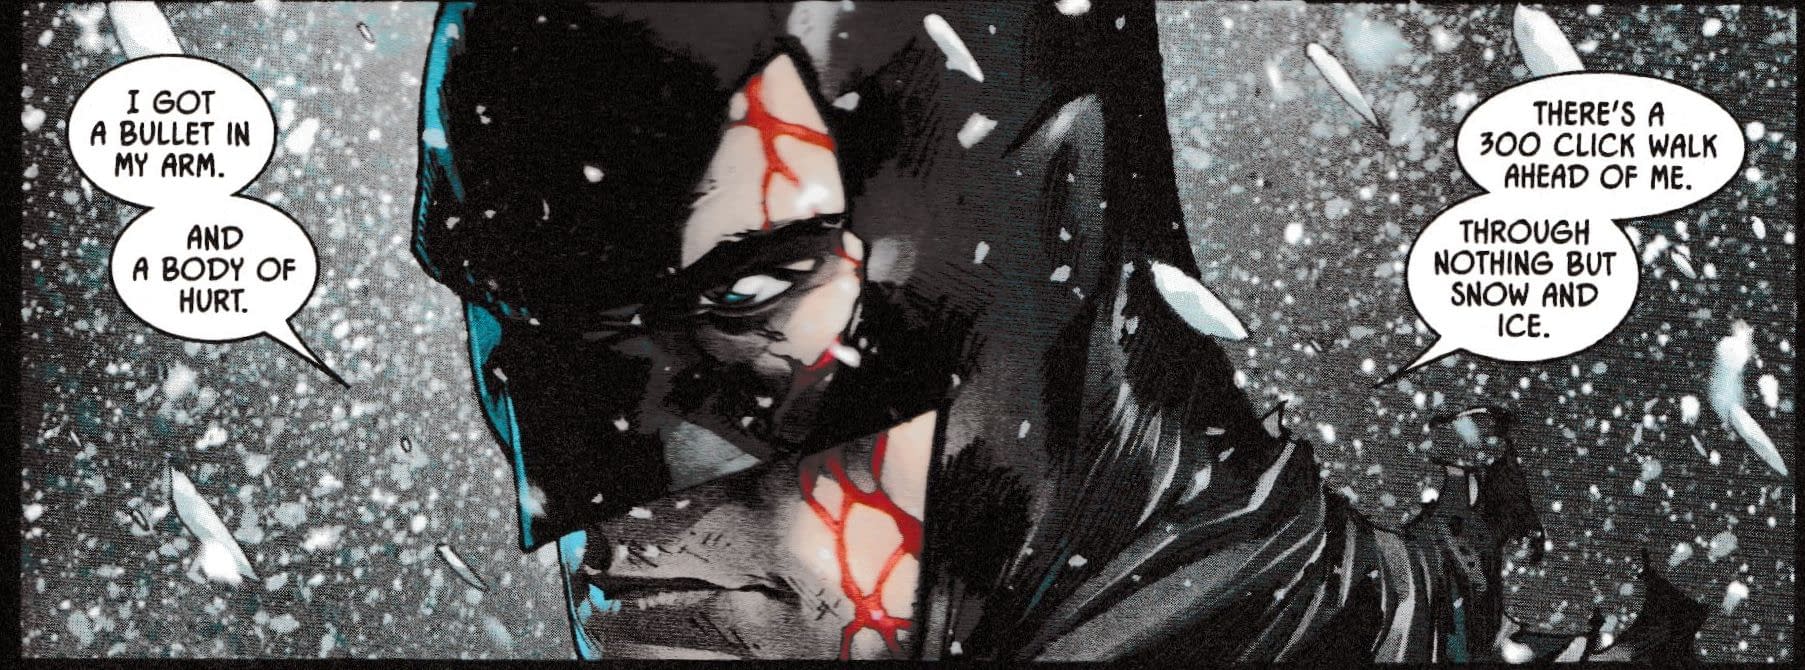 So What Happened to the KGBeast Then? Batman #60 Reveals All (Spoilers)